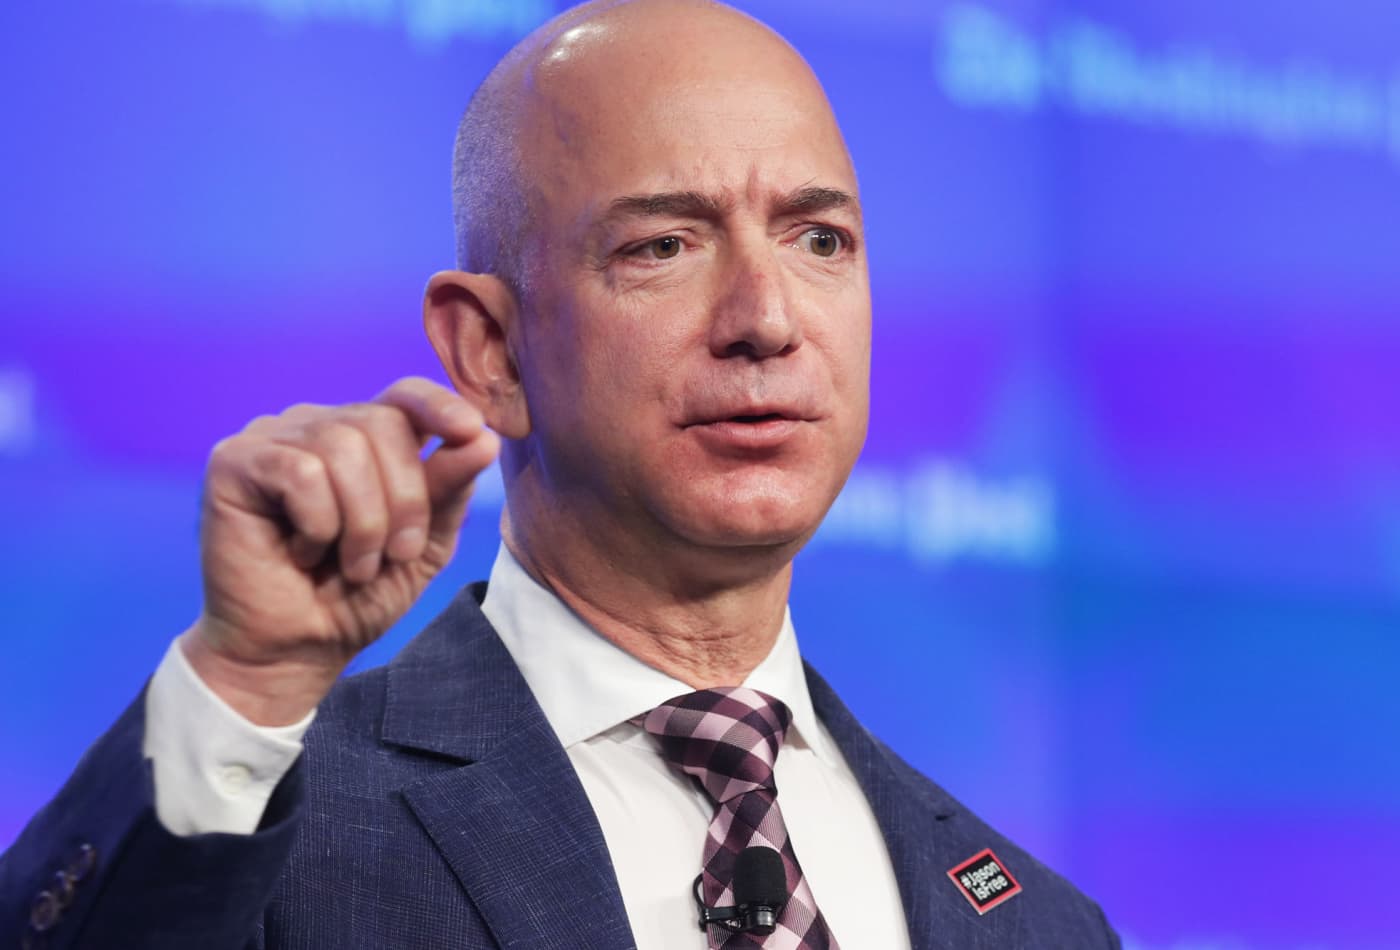 Image result for jeff bezos